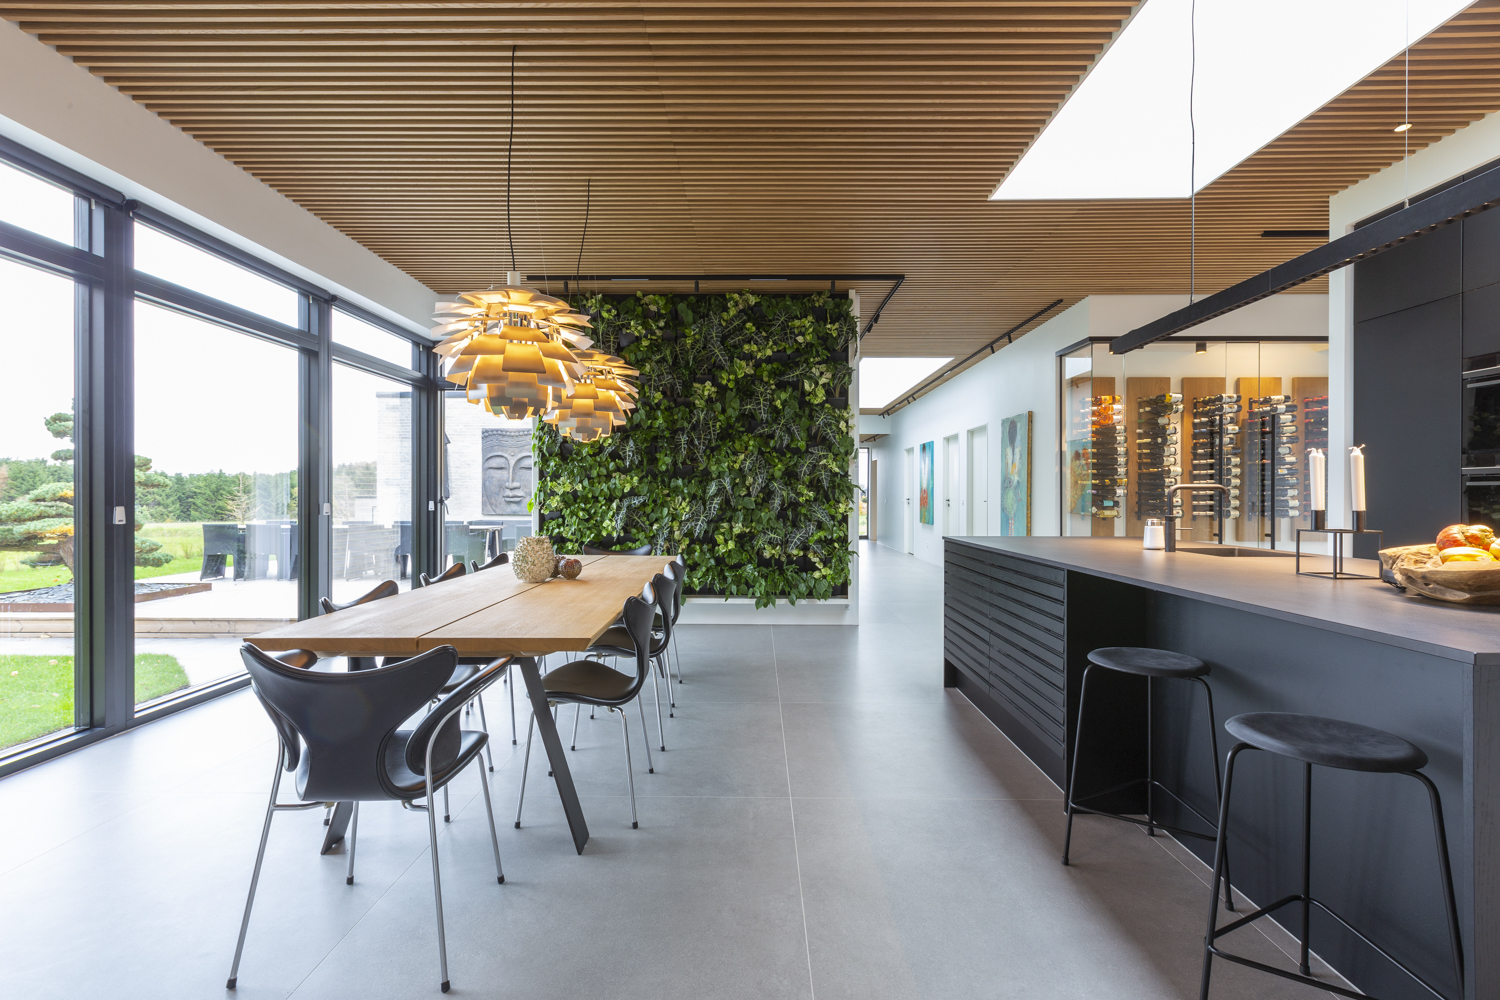 Greenwall for the home: Sanne and Thomas invited nature in